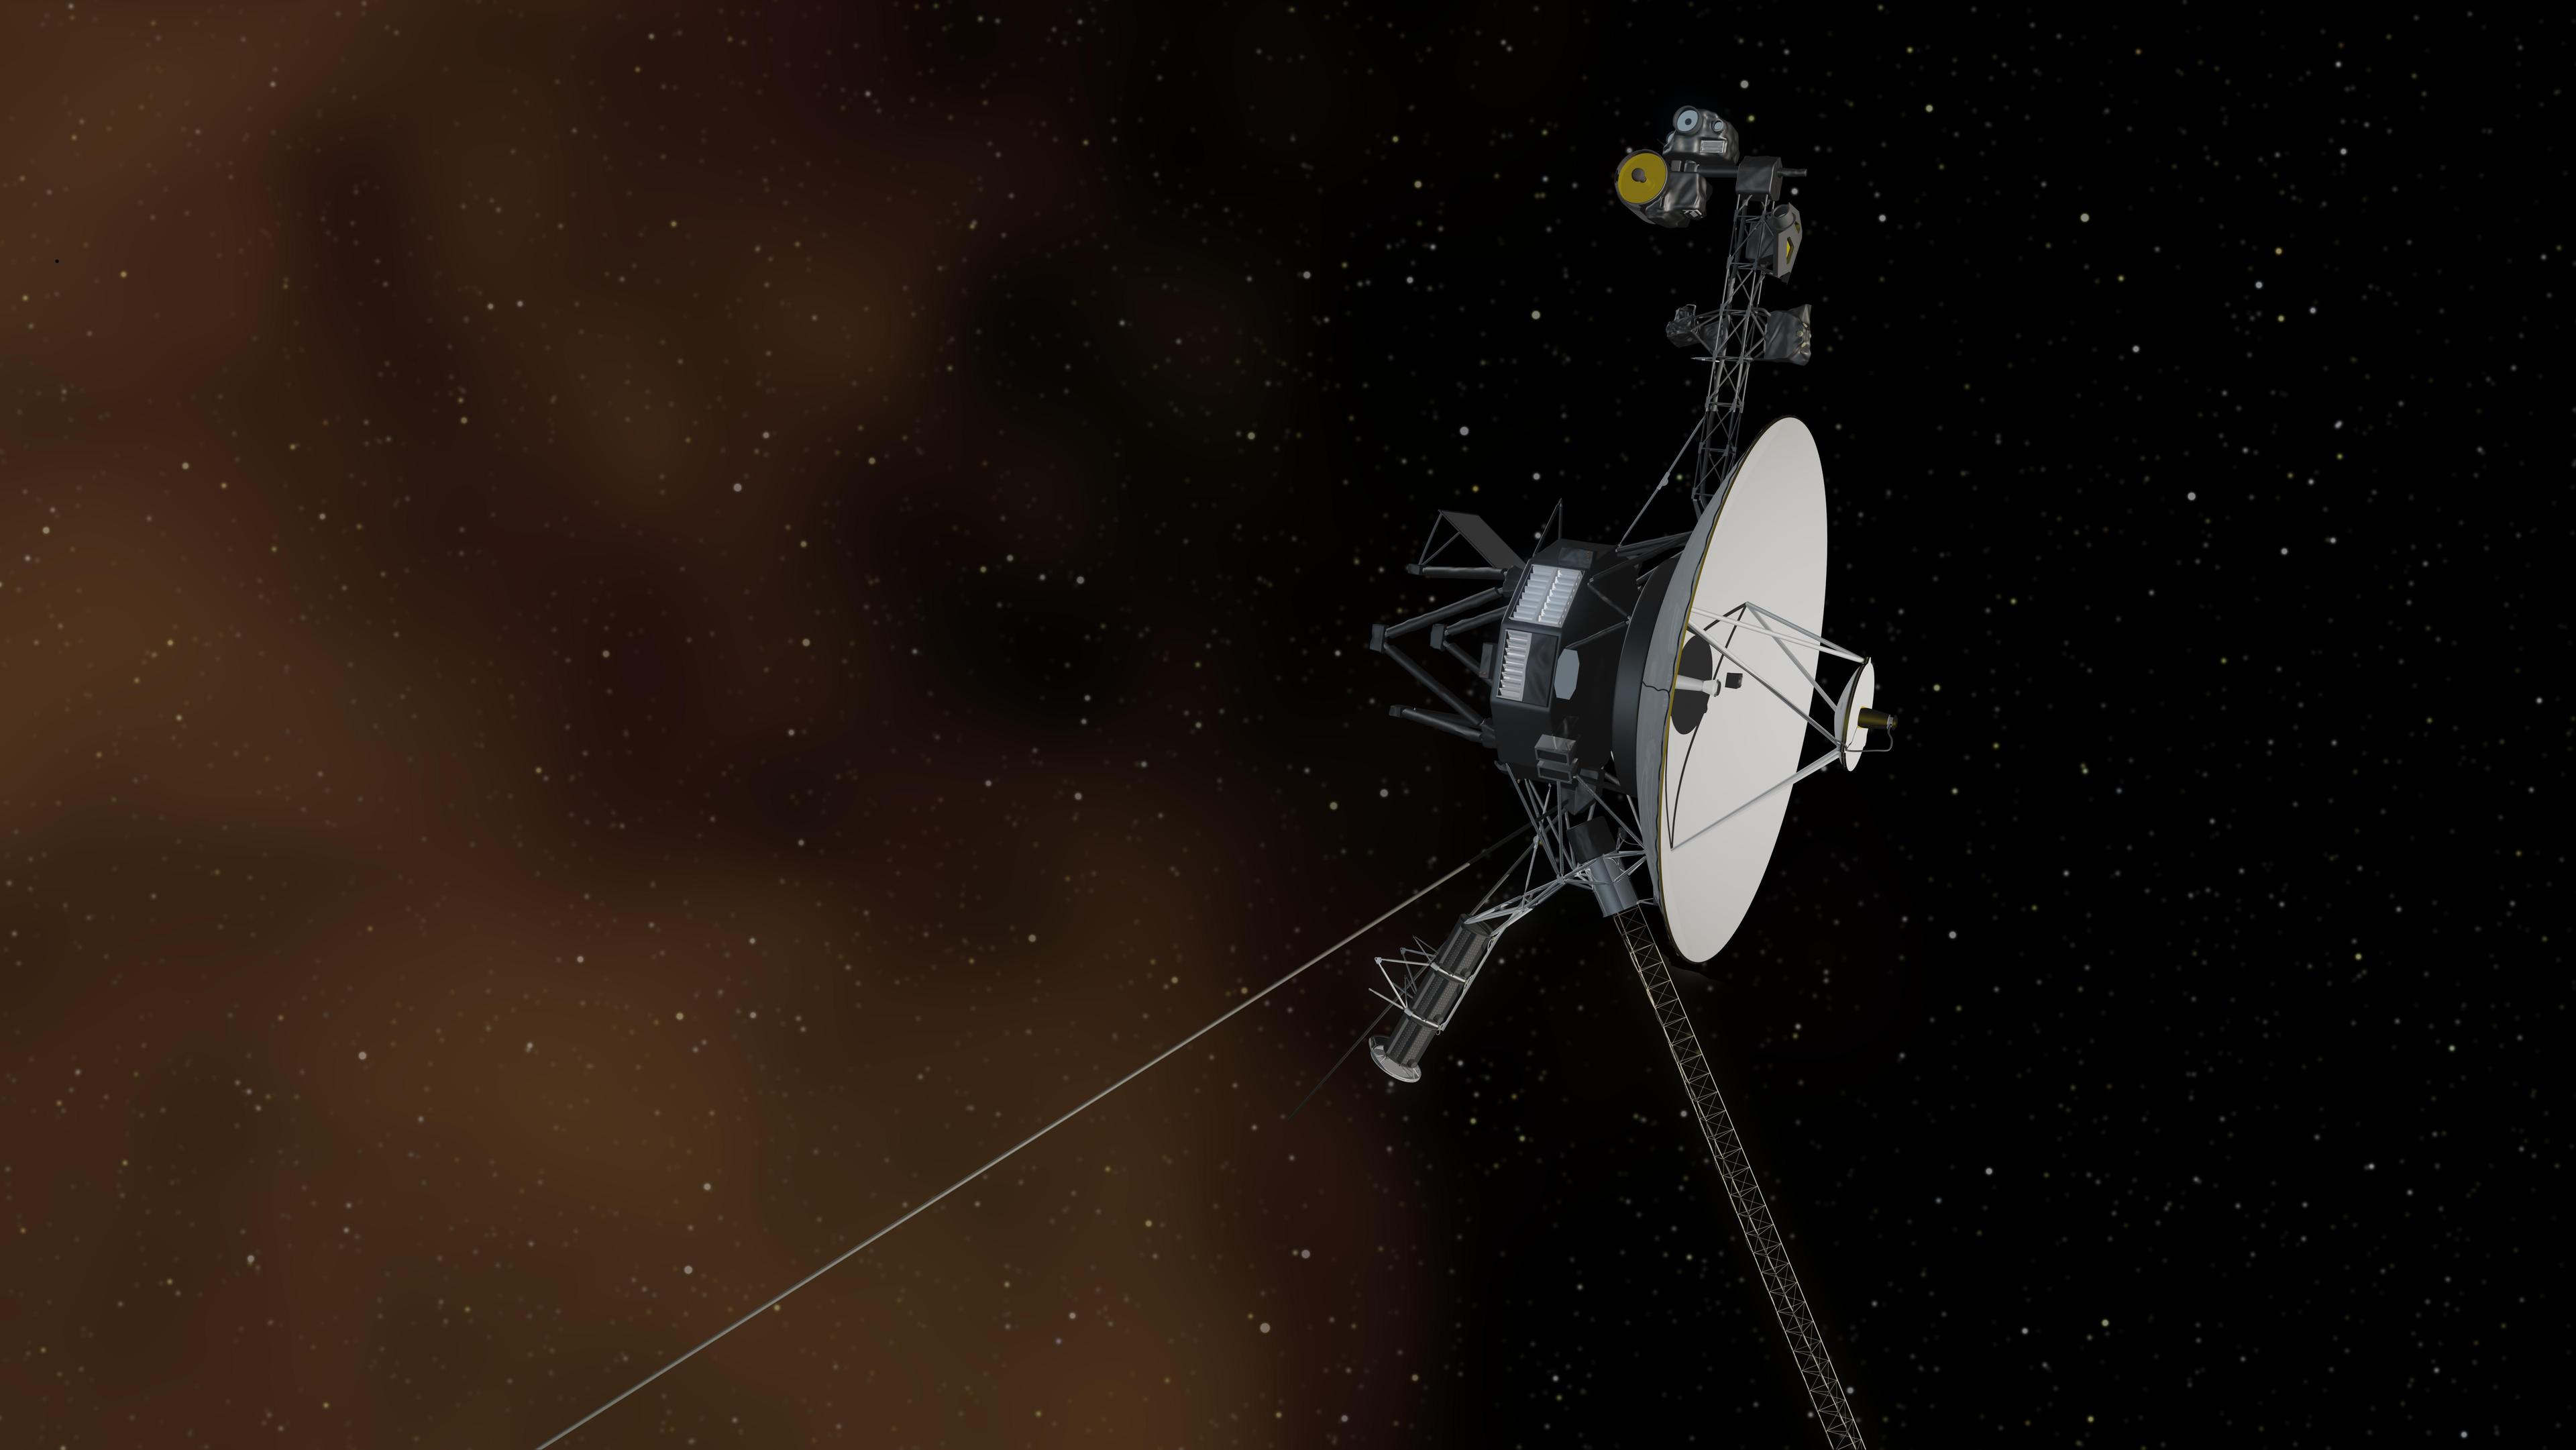 NASA reconnects with Voyager 2 spacecraft